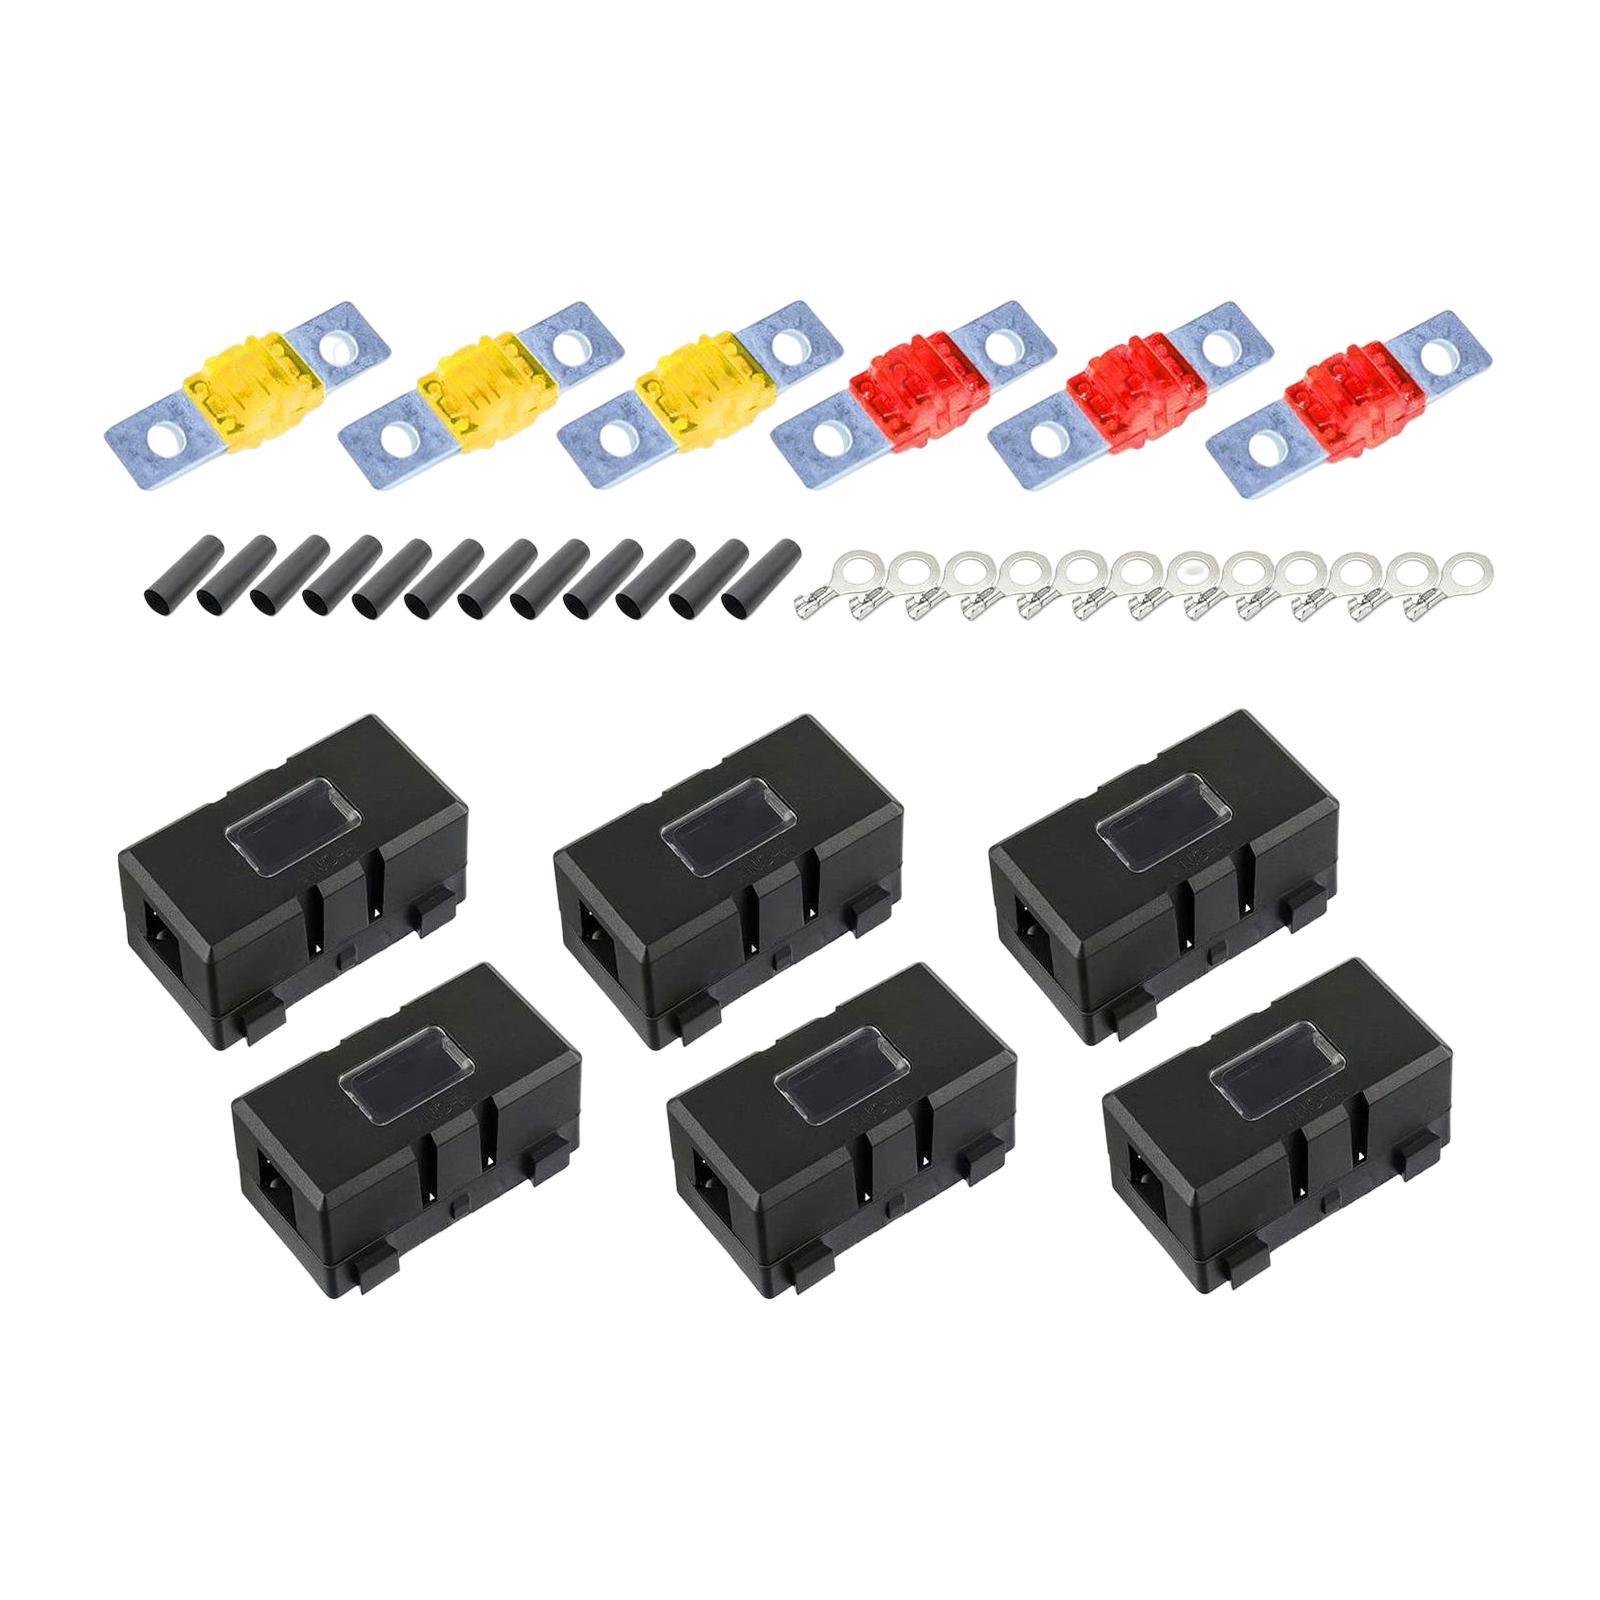 Car ANS Fuse Holder Block Durable Waterproof for Motorcycles Cars 6 Set 40A 50A 60A